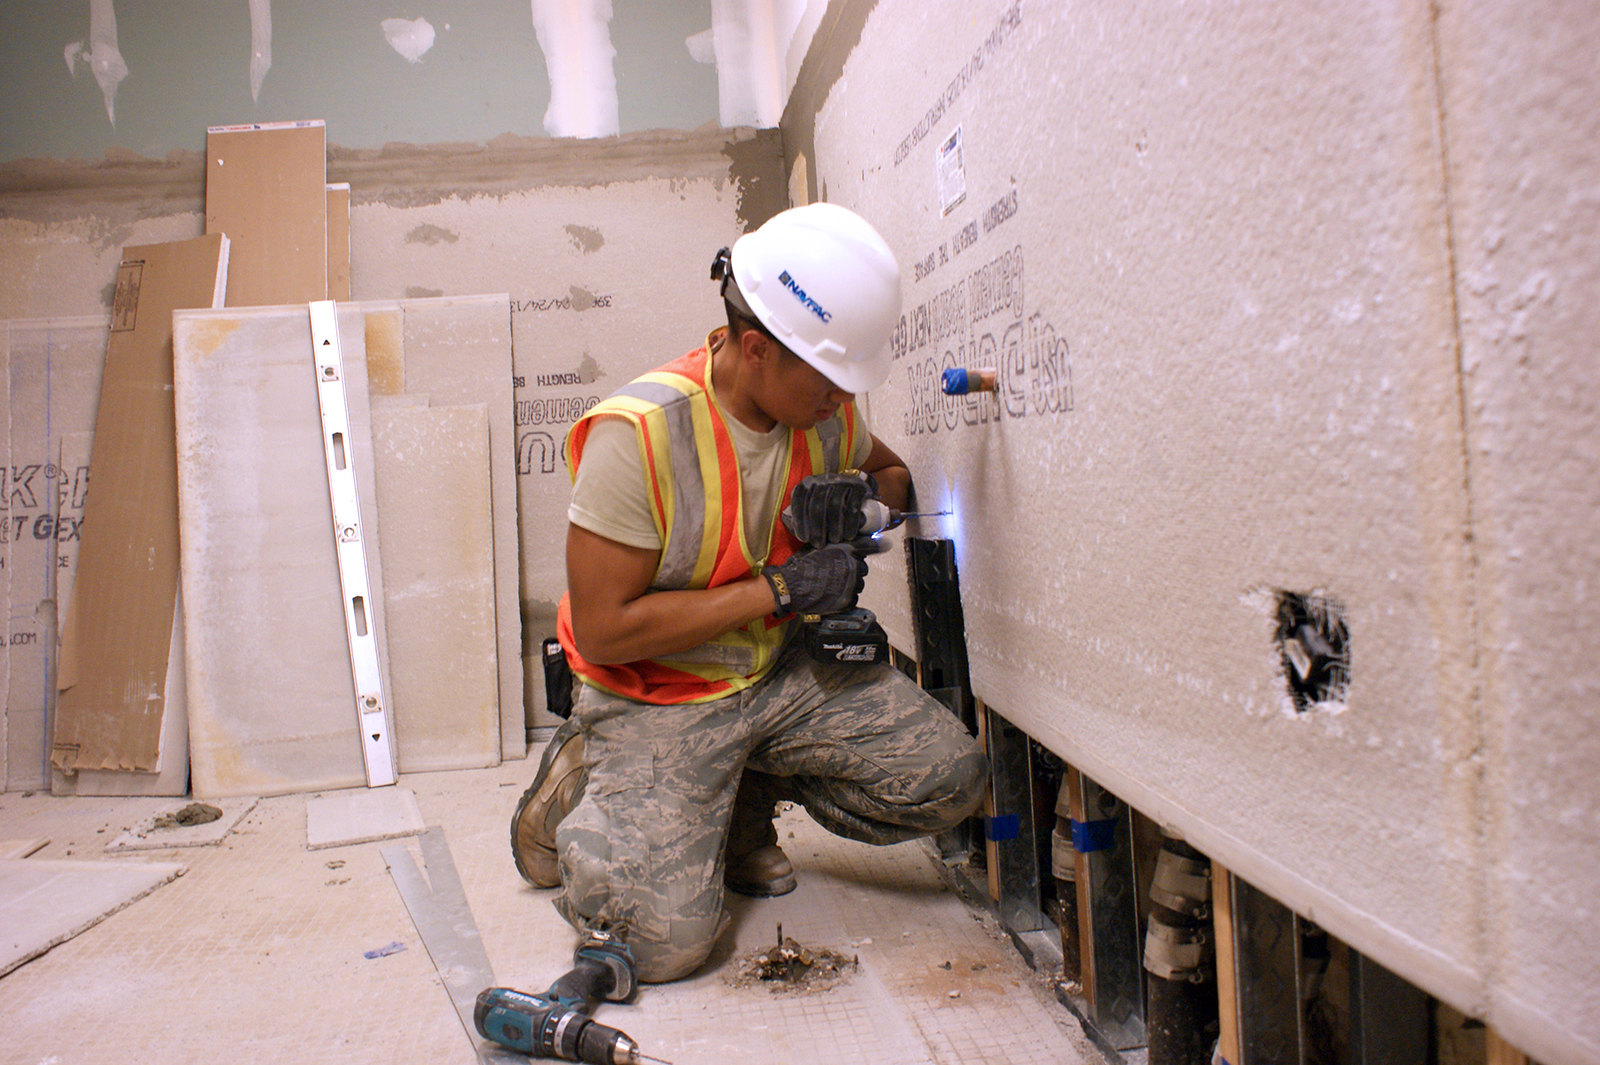 PEARL HARBOR-HICKAM, Hawaii (Jan. 21, 2014)  As part of a complete makeover project, an Air Force apprentice installs Durarock cement backer board to the walls of the men's restroom at the Hickam Gymnasium, Joint Base Pearl Harbor-Hickam.  The renovations began in January 2014 and are expected to continue through February 2014. Photo by Sila Manahane, NAVFAC Hawaii public affairs assistant.